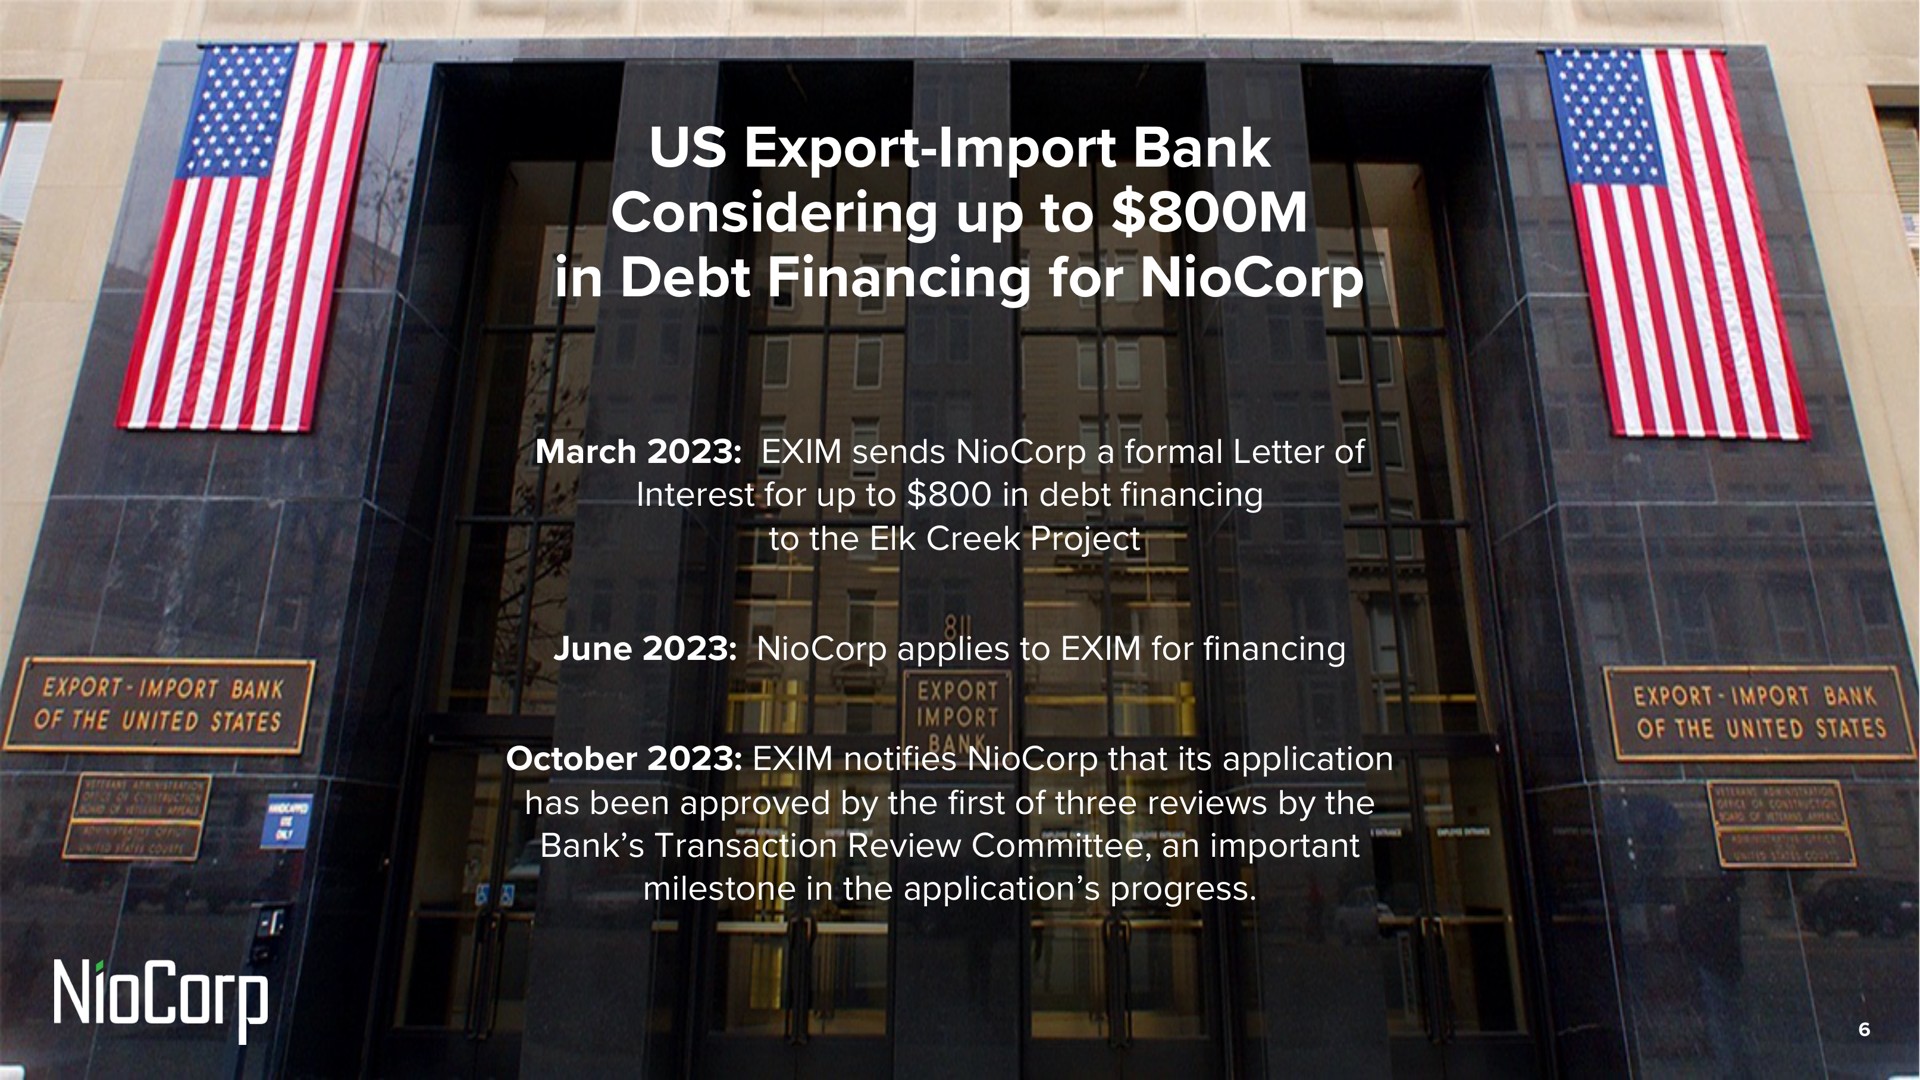 us export import bank considering up to in debt financing for march sends a formal letter of interest for up to in debt financing to the elk creek project june applies to for financing notifies that its application has been approved by the first of three reviews by the bank transaction review committee an important milestone in the application progress ula export import united states export import aes i | NioCorp